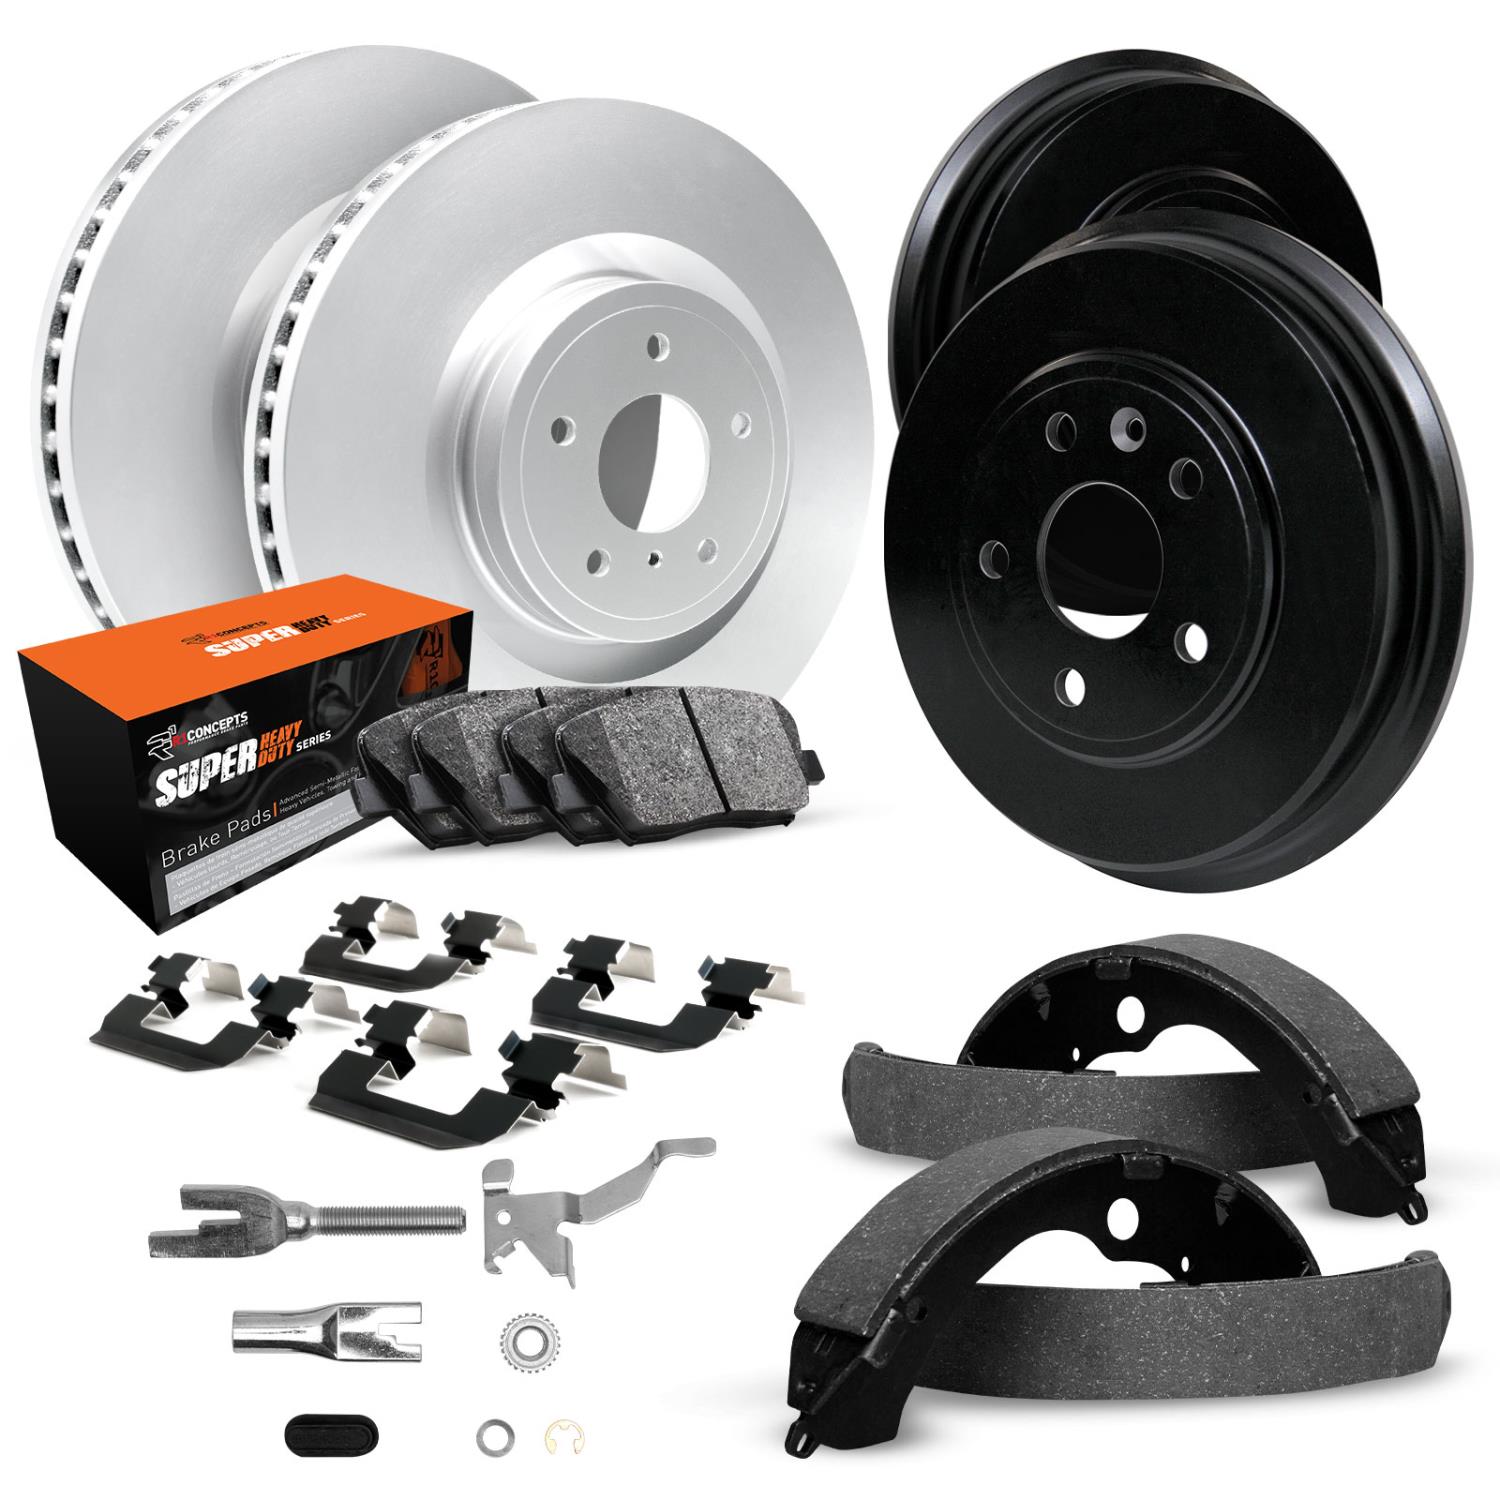 GEO-Carbon Brake Rotor & Drum Set w/Super-Duty Pads, Shoes, Hardware/Adjusters, 1975-1976 Ford/Lincoln/Mercury/Mazda